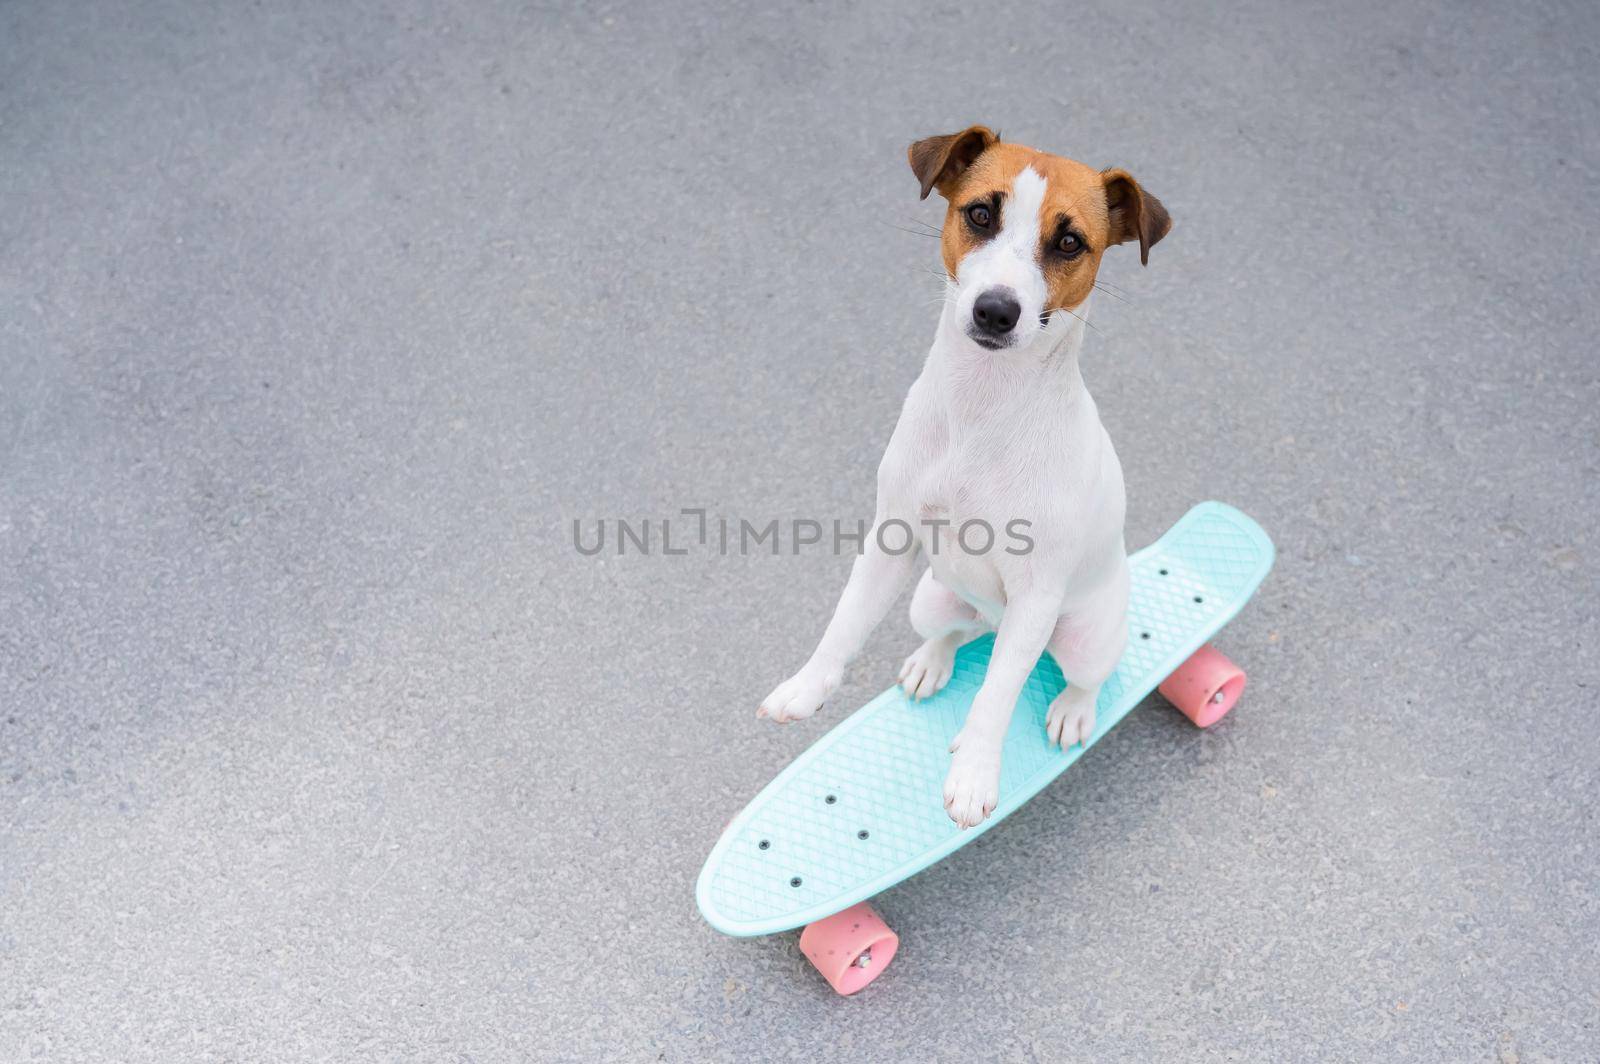 The dog rides a penny board outdoors. Top view of a jack russell terrier on a skateboard by mrwed54